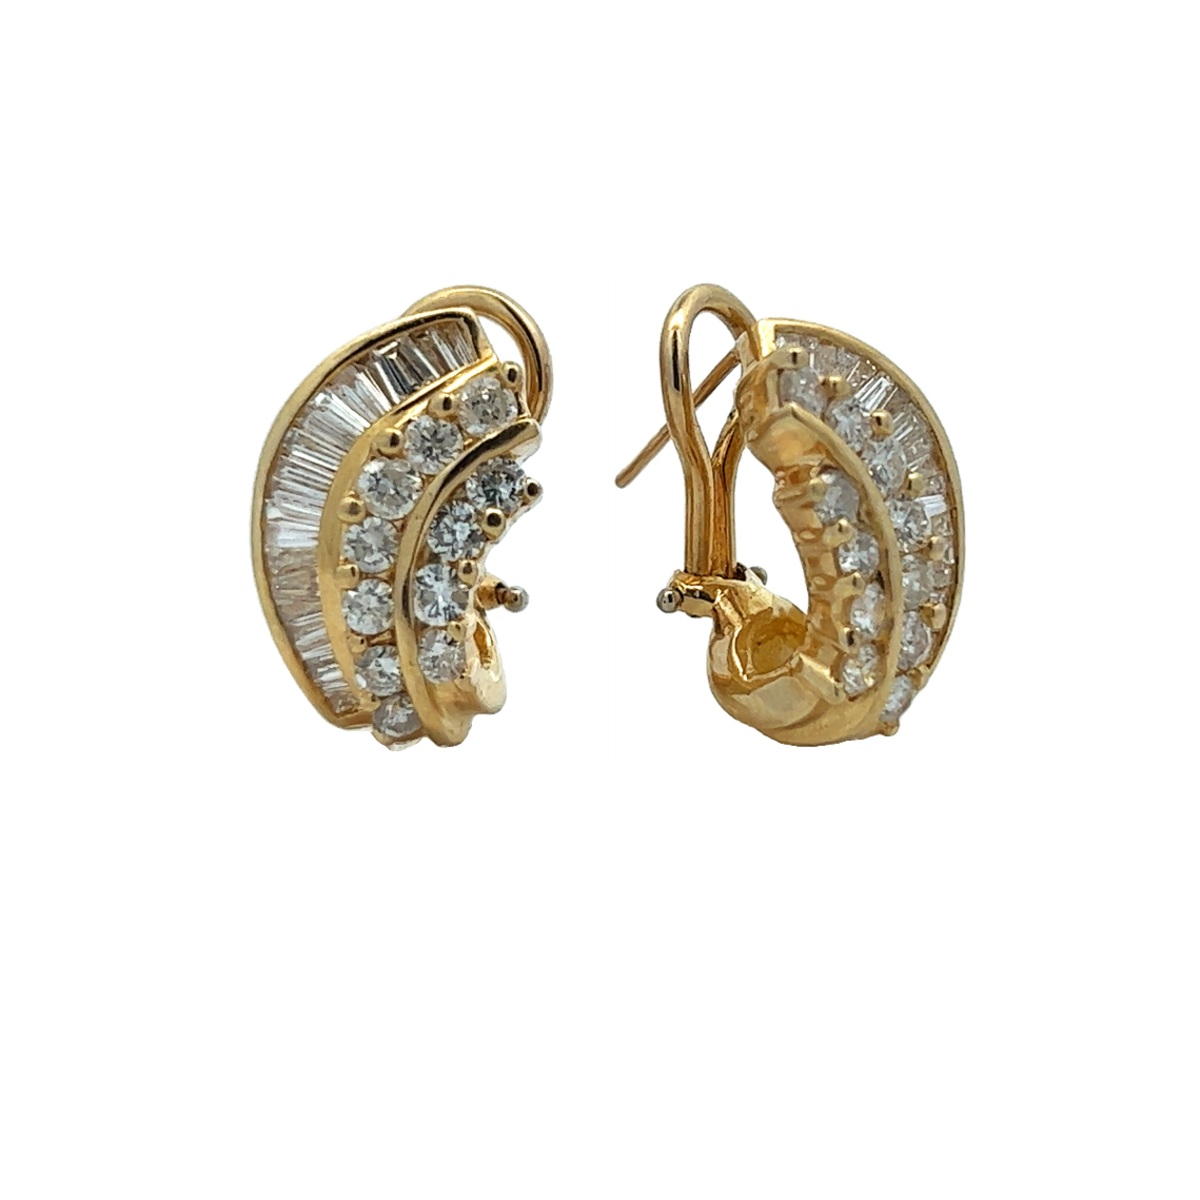 1980s 18KT Yellow Gold Diamond Earrings front and side view